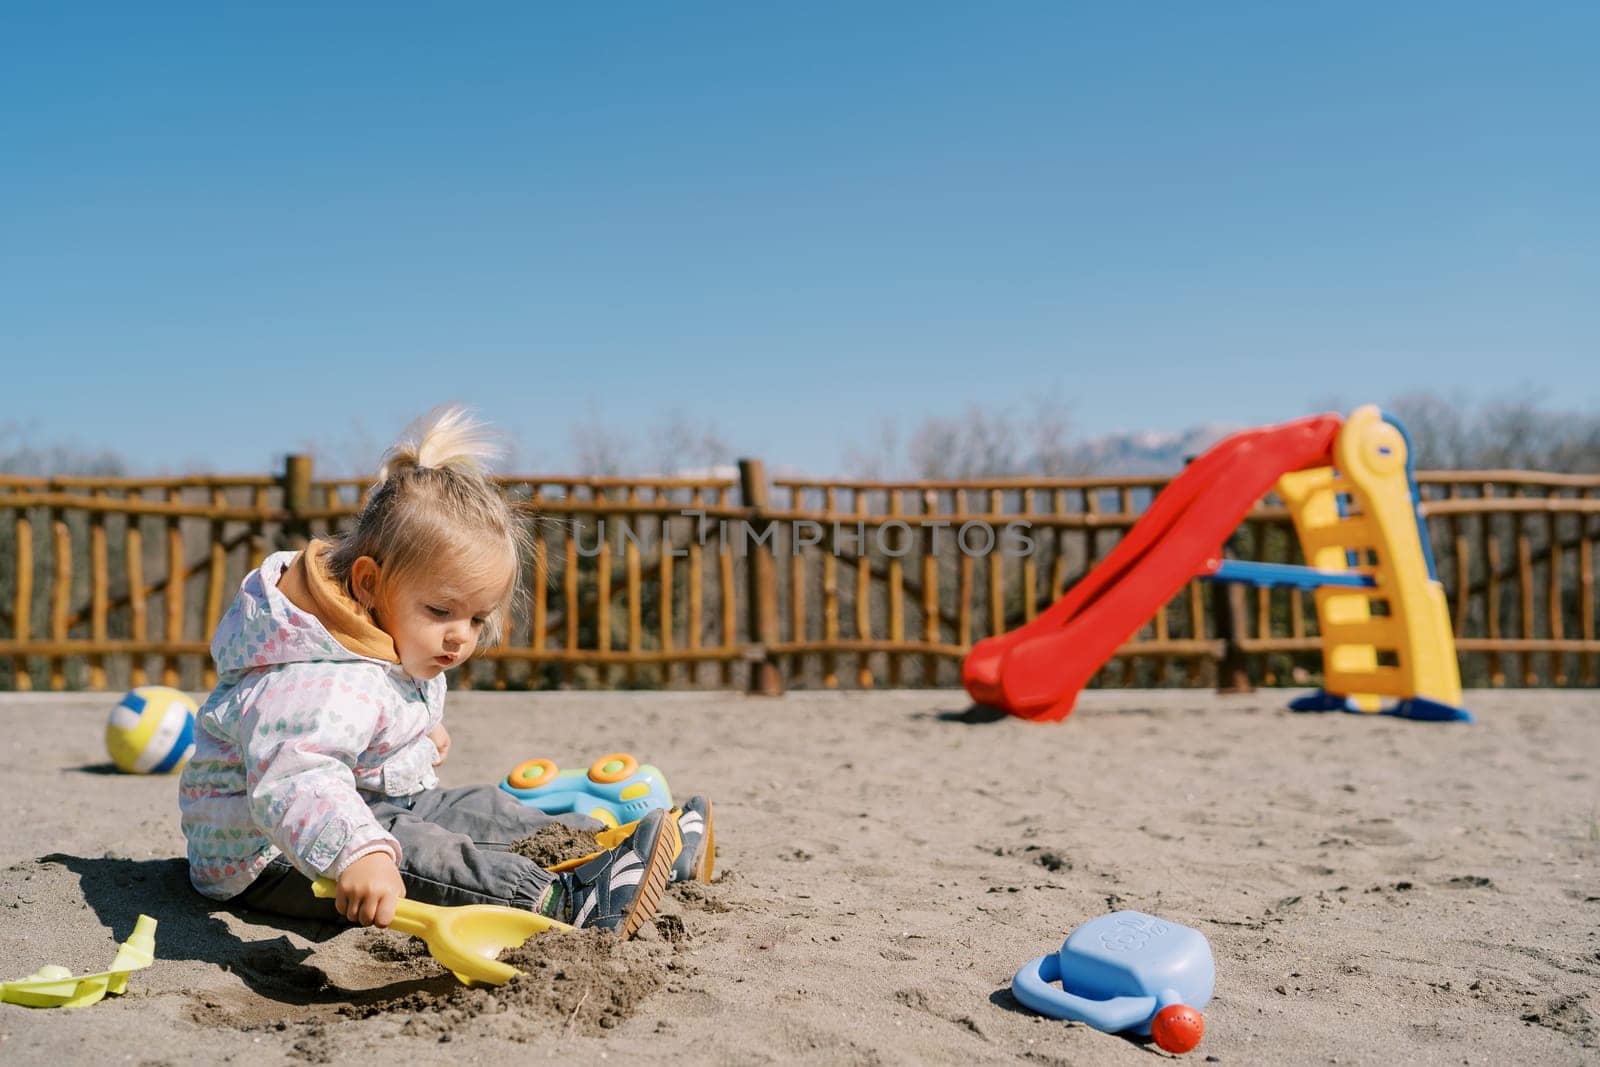 Little girl sits on the playground and digs the sand with a toy shovel by Nadtochiy